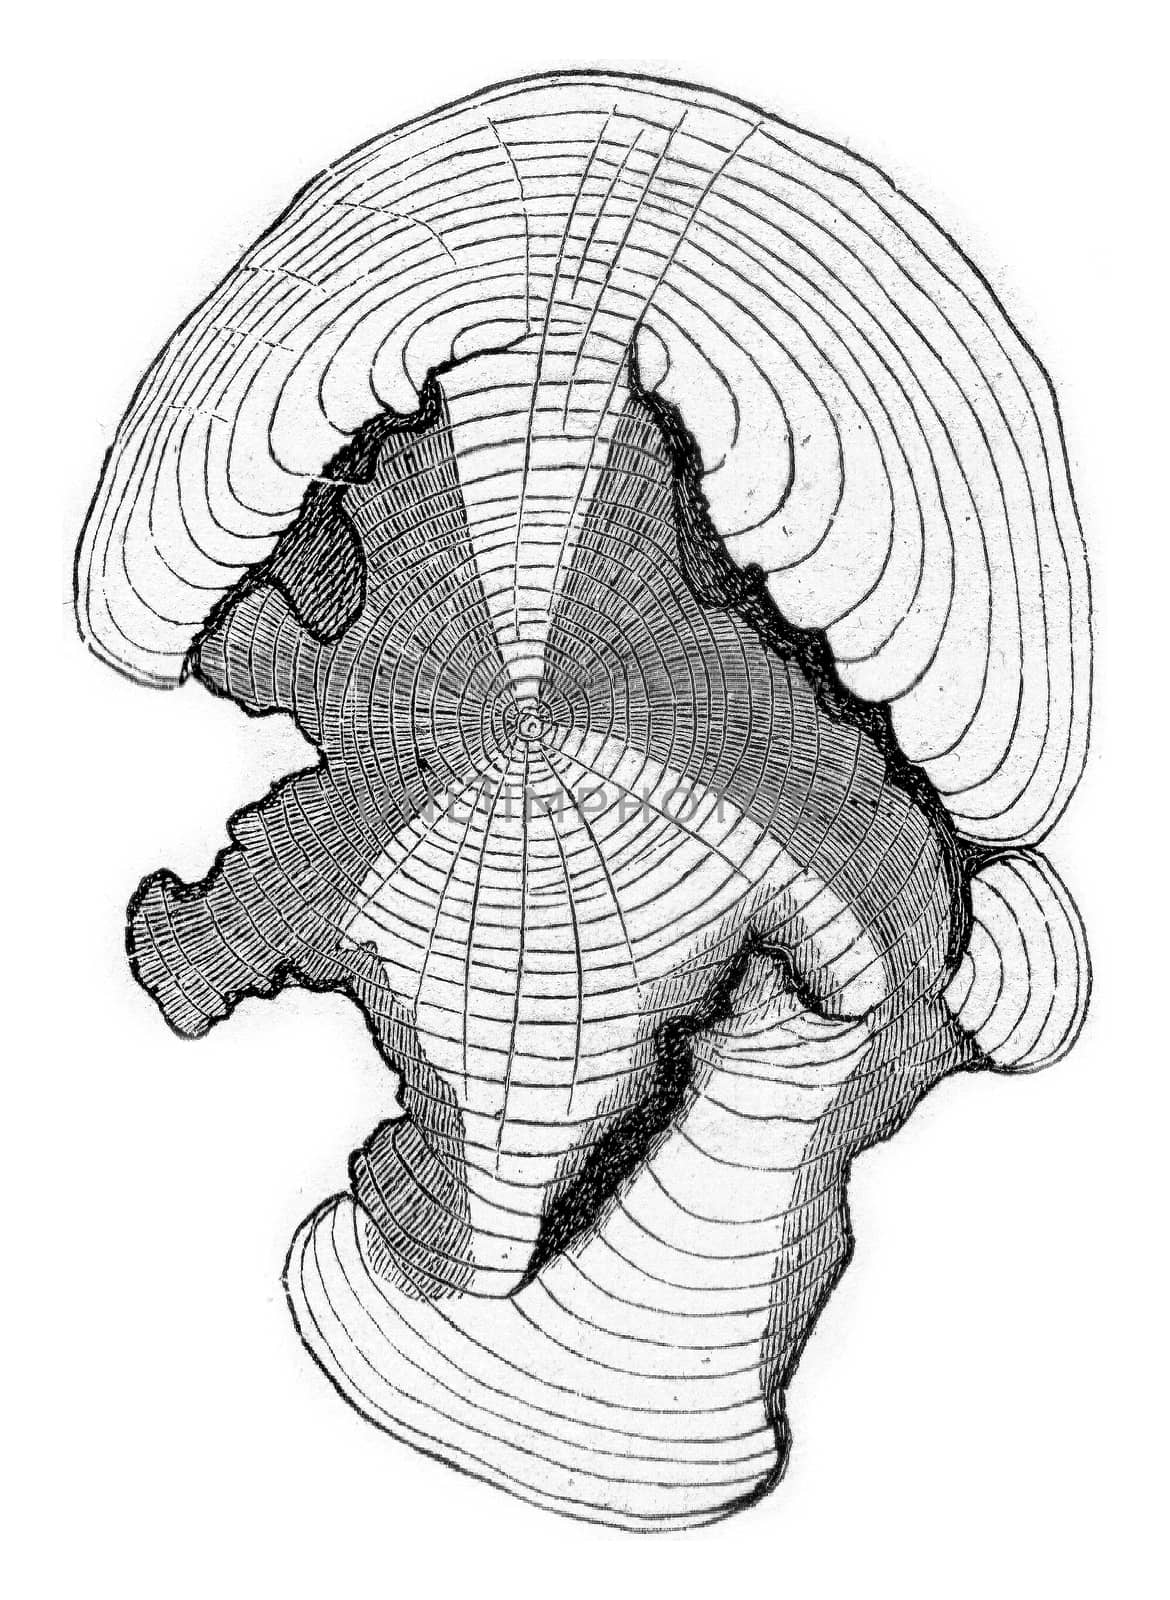 Cross-section at the stem shown in fig, previous, vintage engrav by Morphart